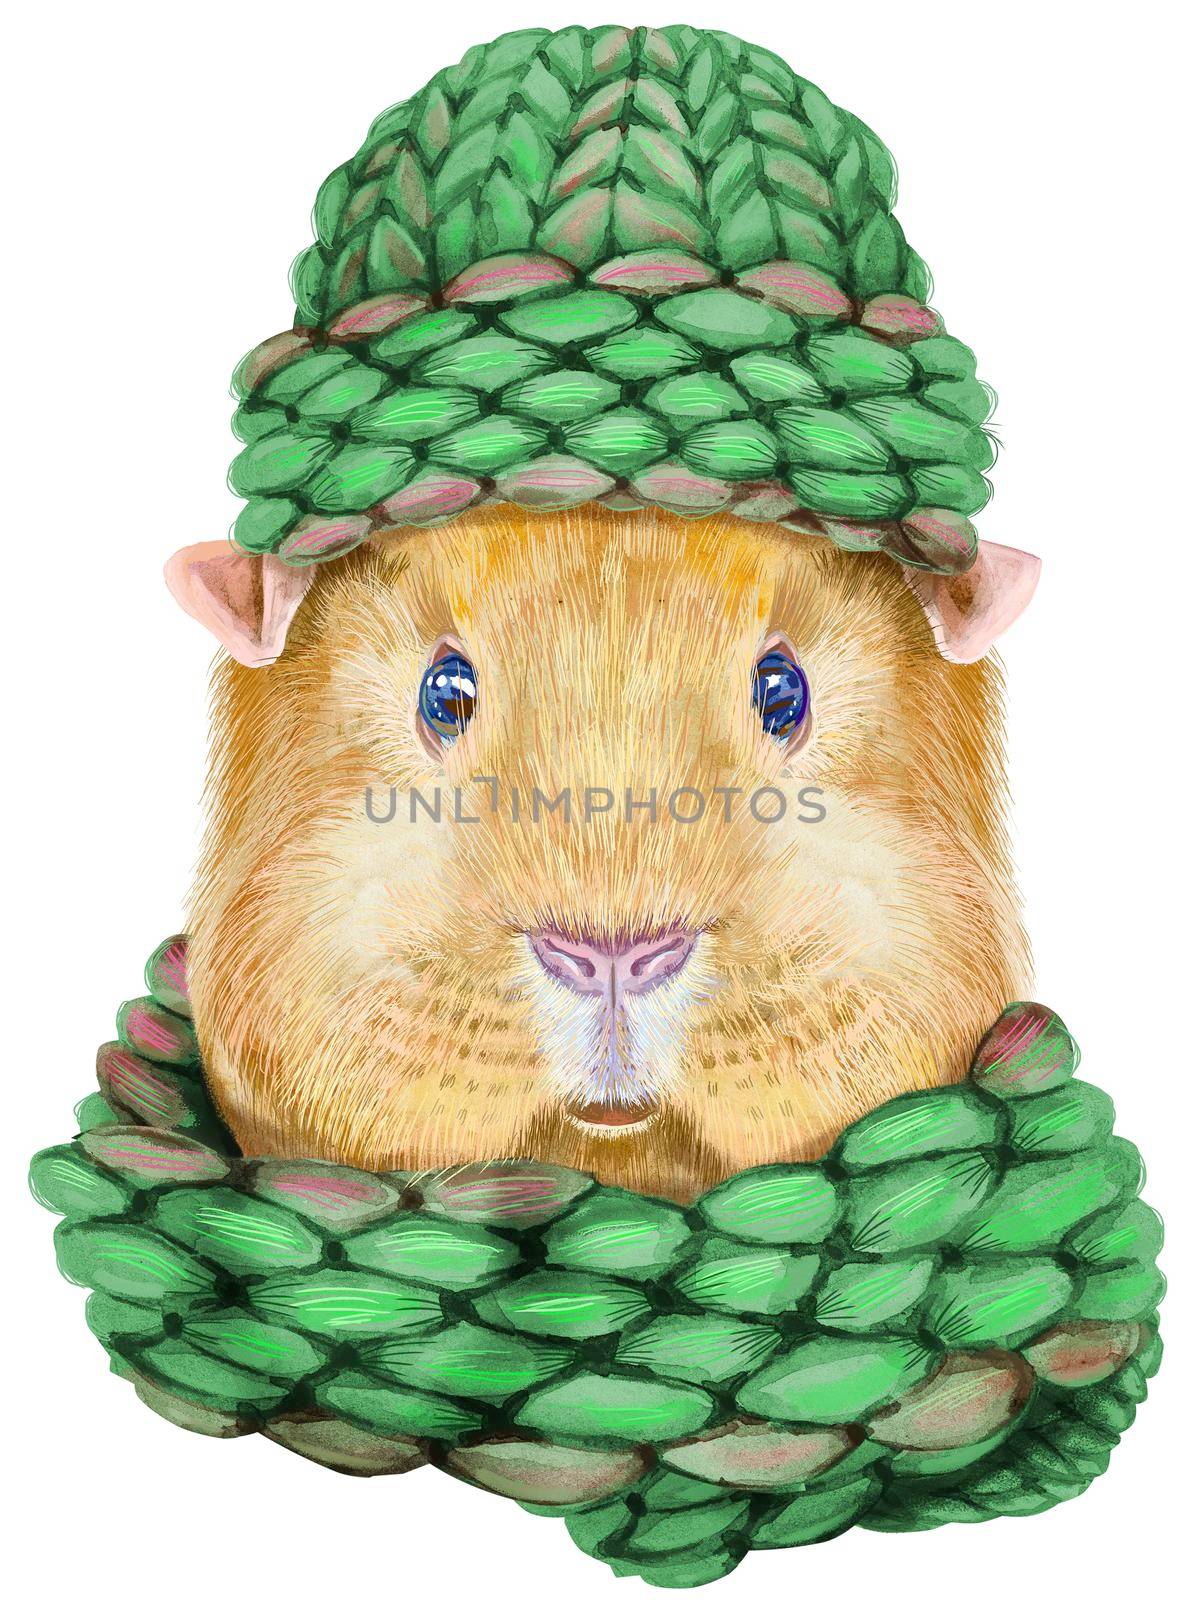 Guinea pig pig in a green knitted hat and scarf. Pig for T-shirt graphics. Watercolor Self guinea pig illustration